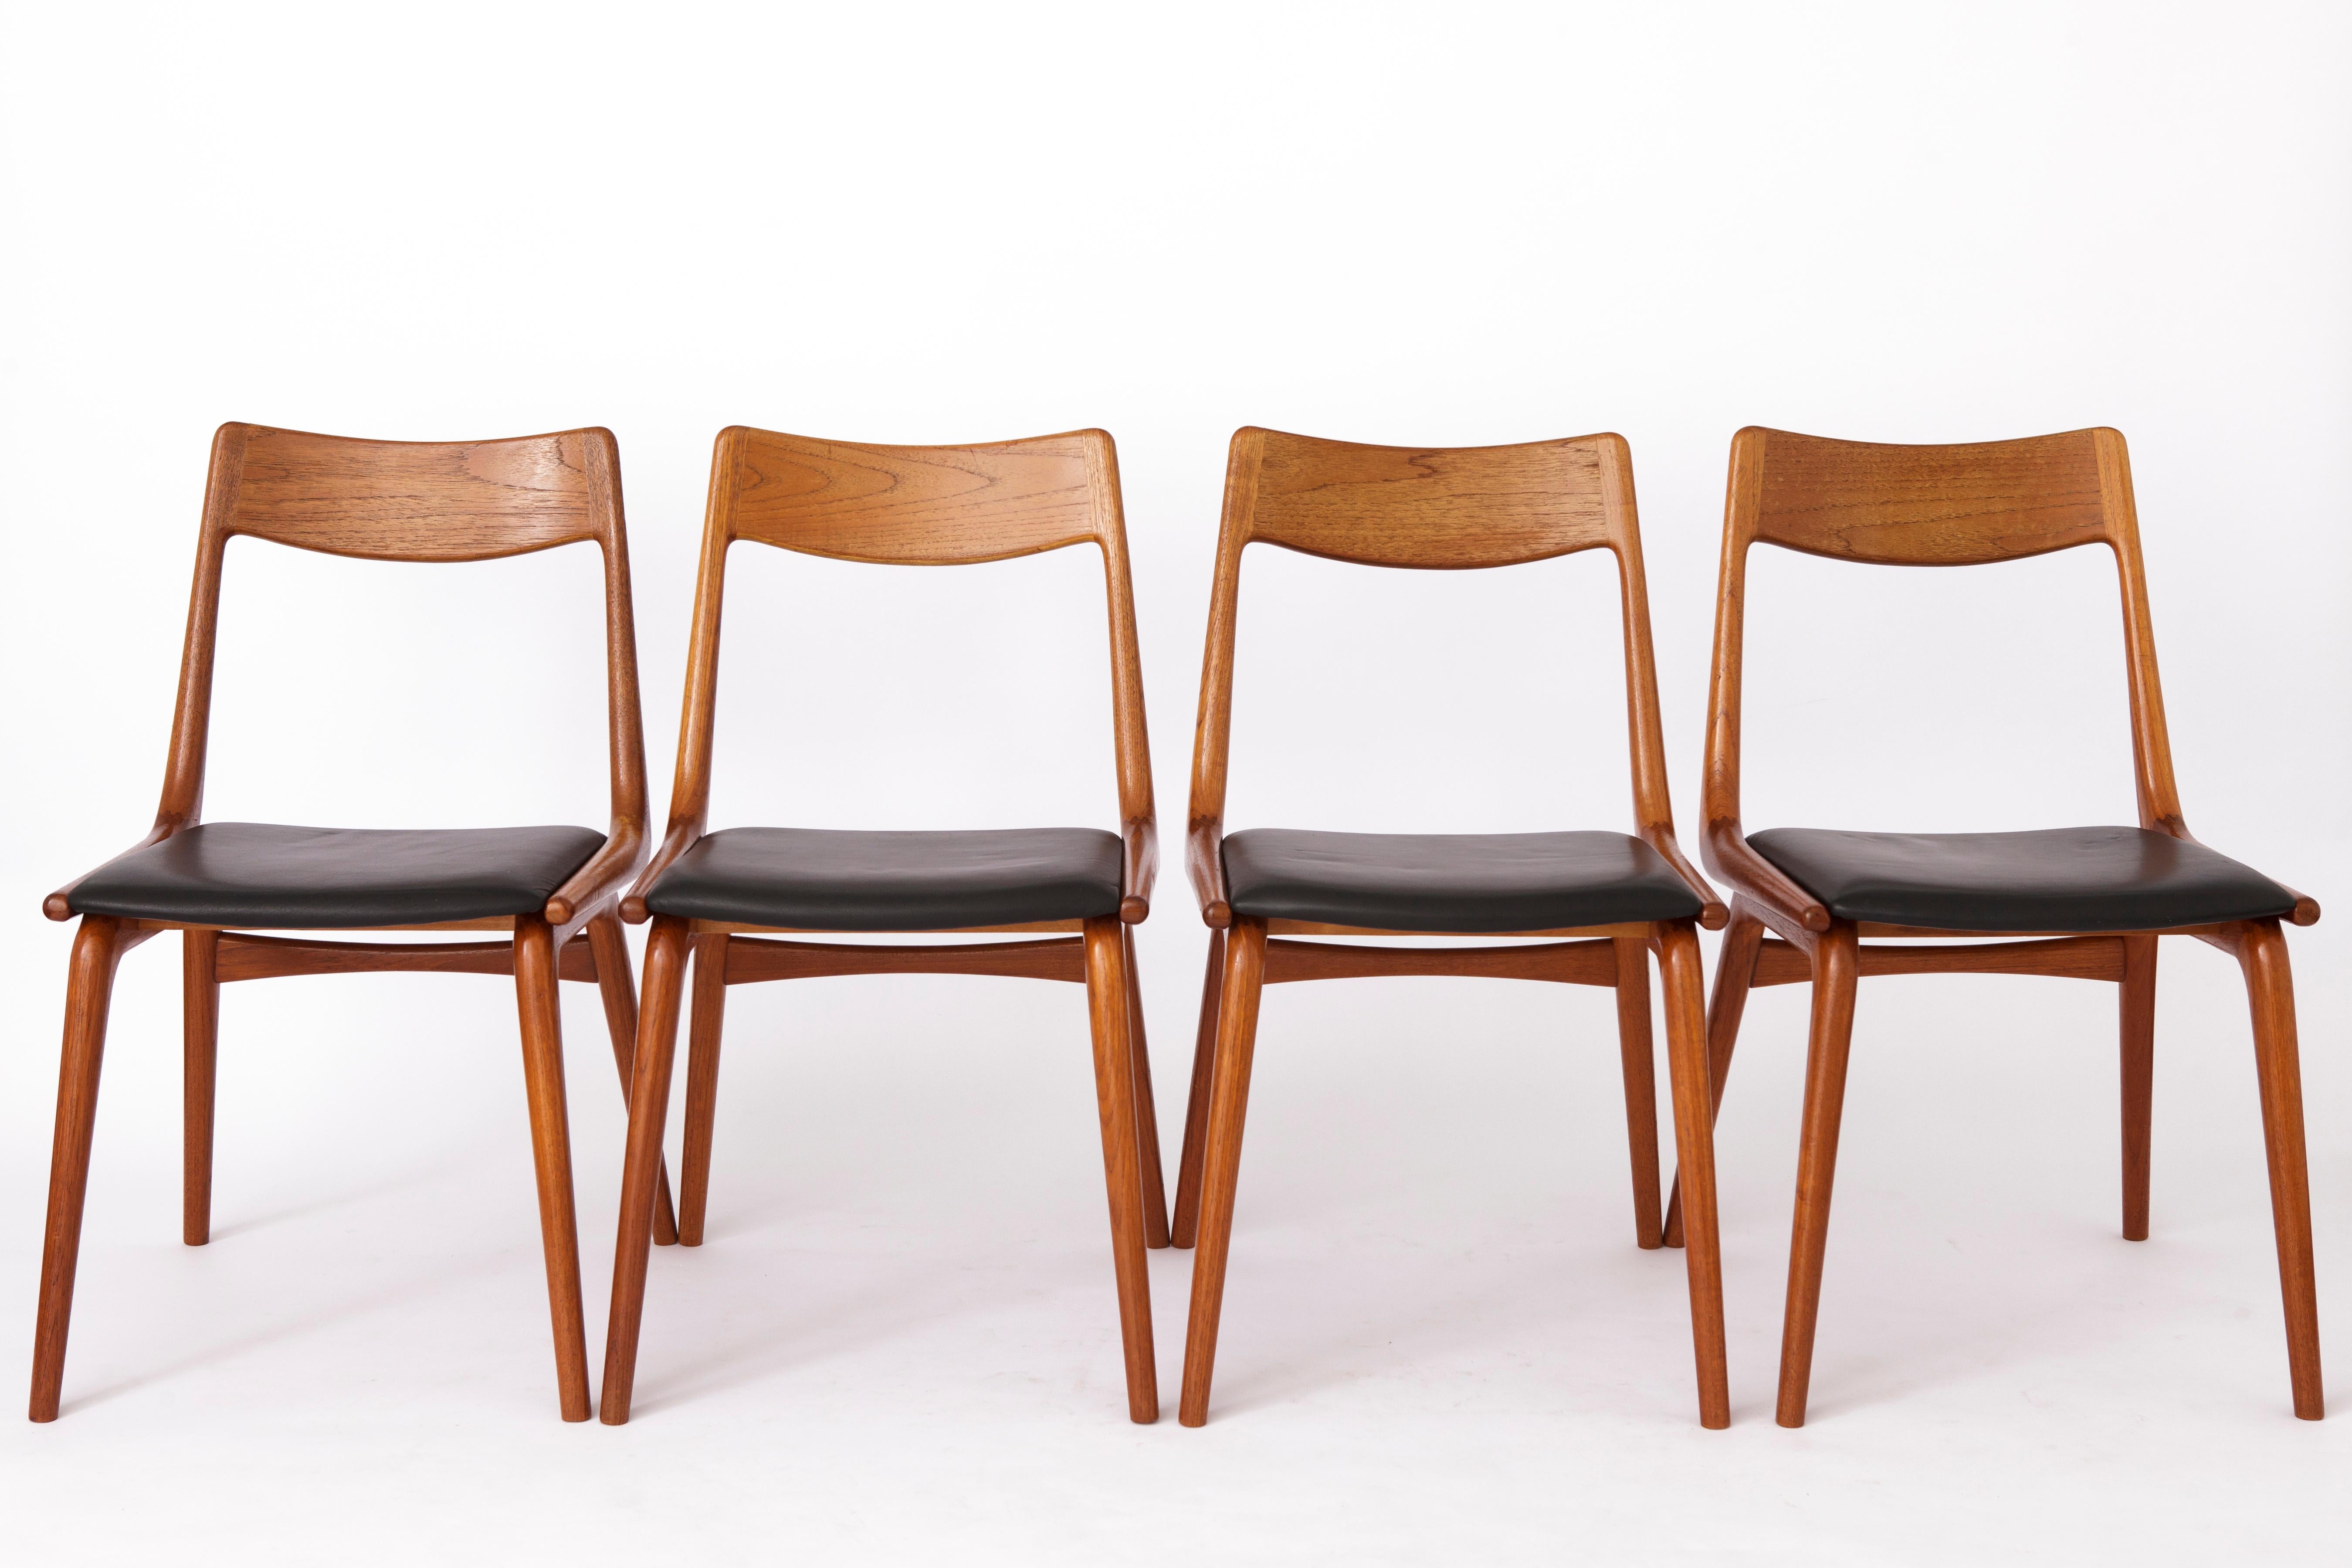 Set 4 vintage midcentury chairs designed by Alfred Christensen for
manufacturer Slagelse Møbelværk. 
Production period: 1950s, Denmark. 
Displayed price is for a set of 4. 
Totally up to 5 chairs available. Please DM if you are interested in all 5